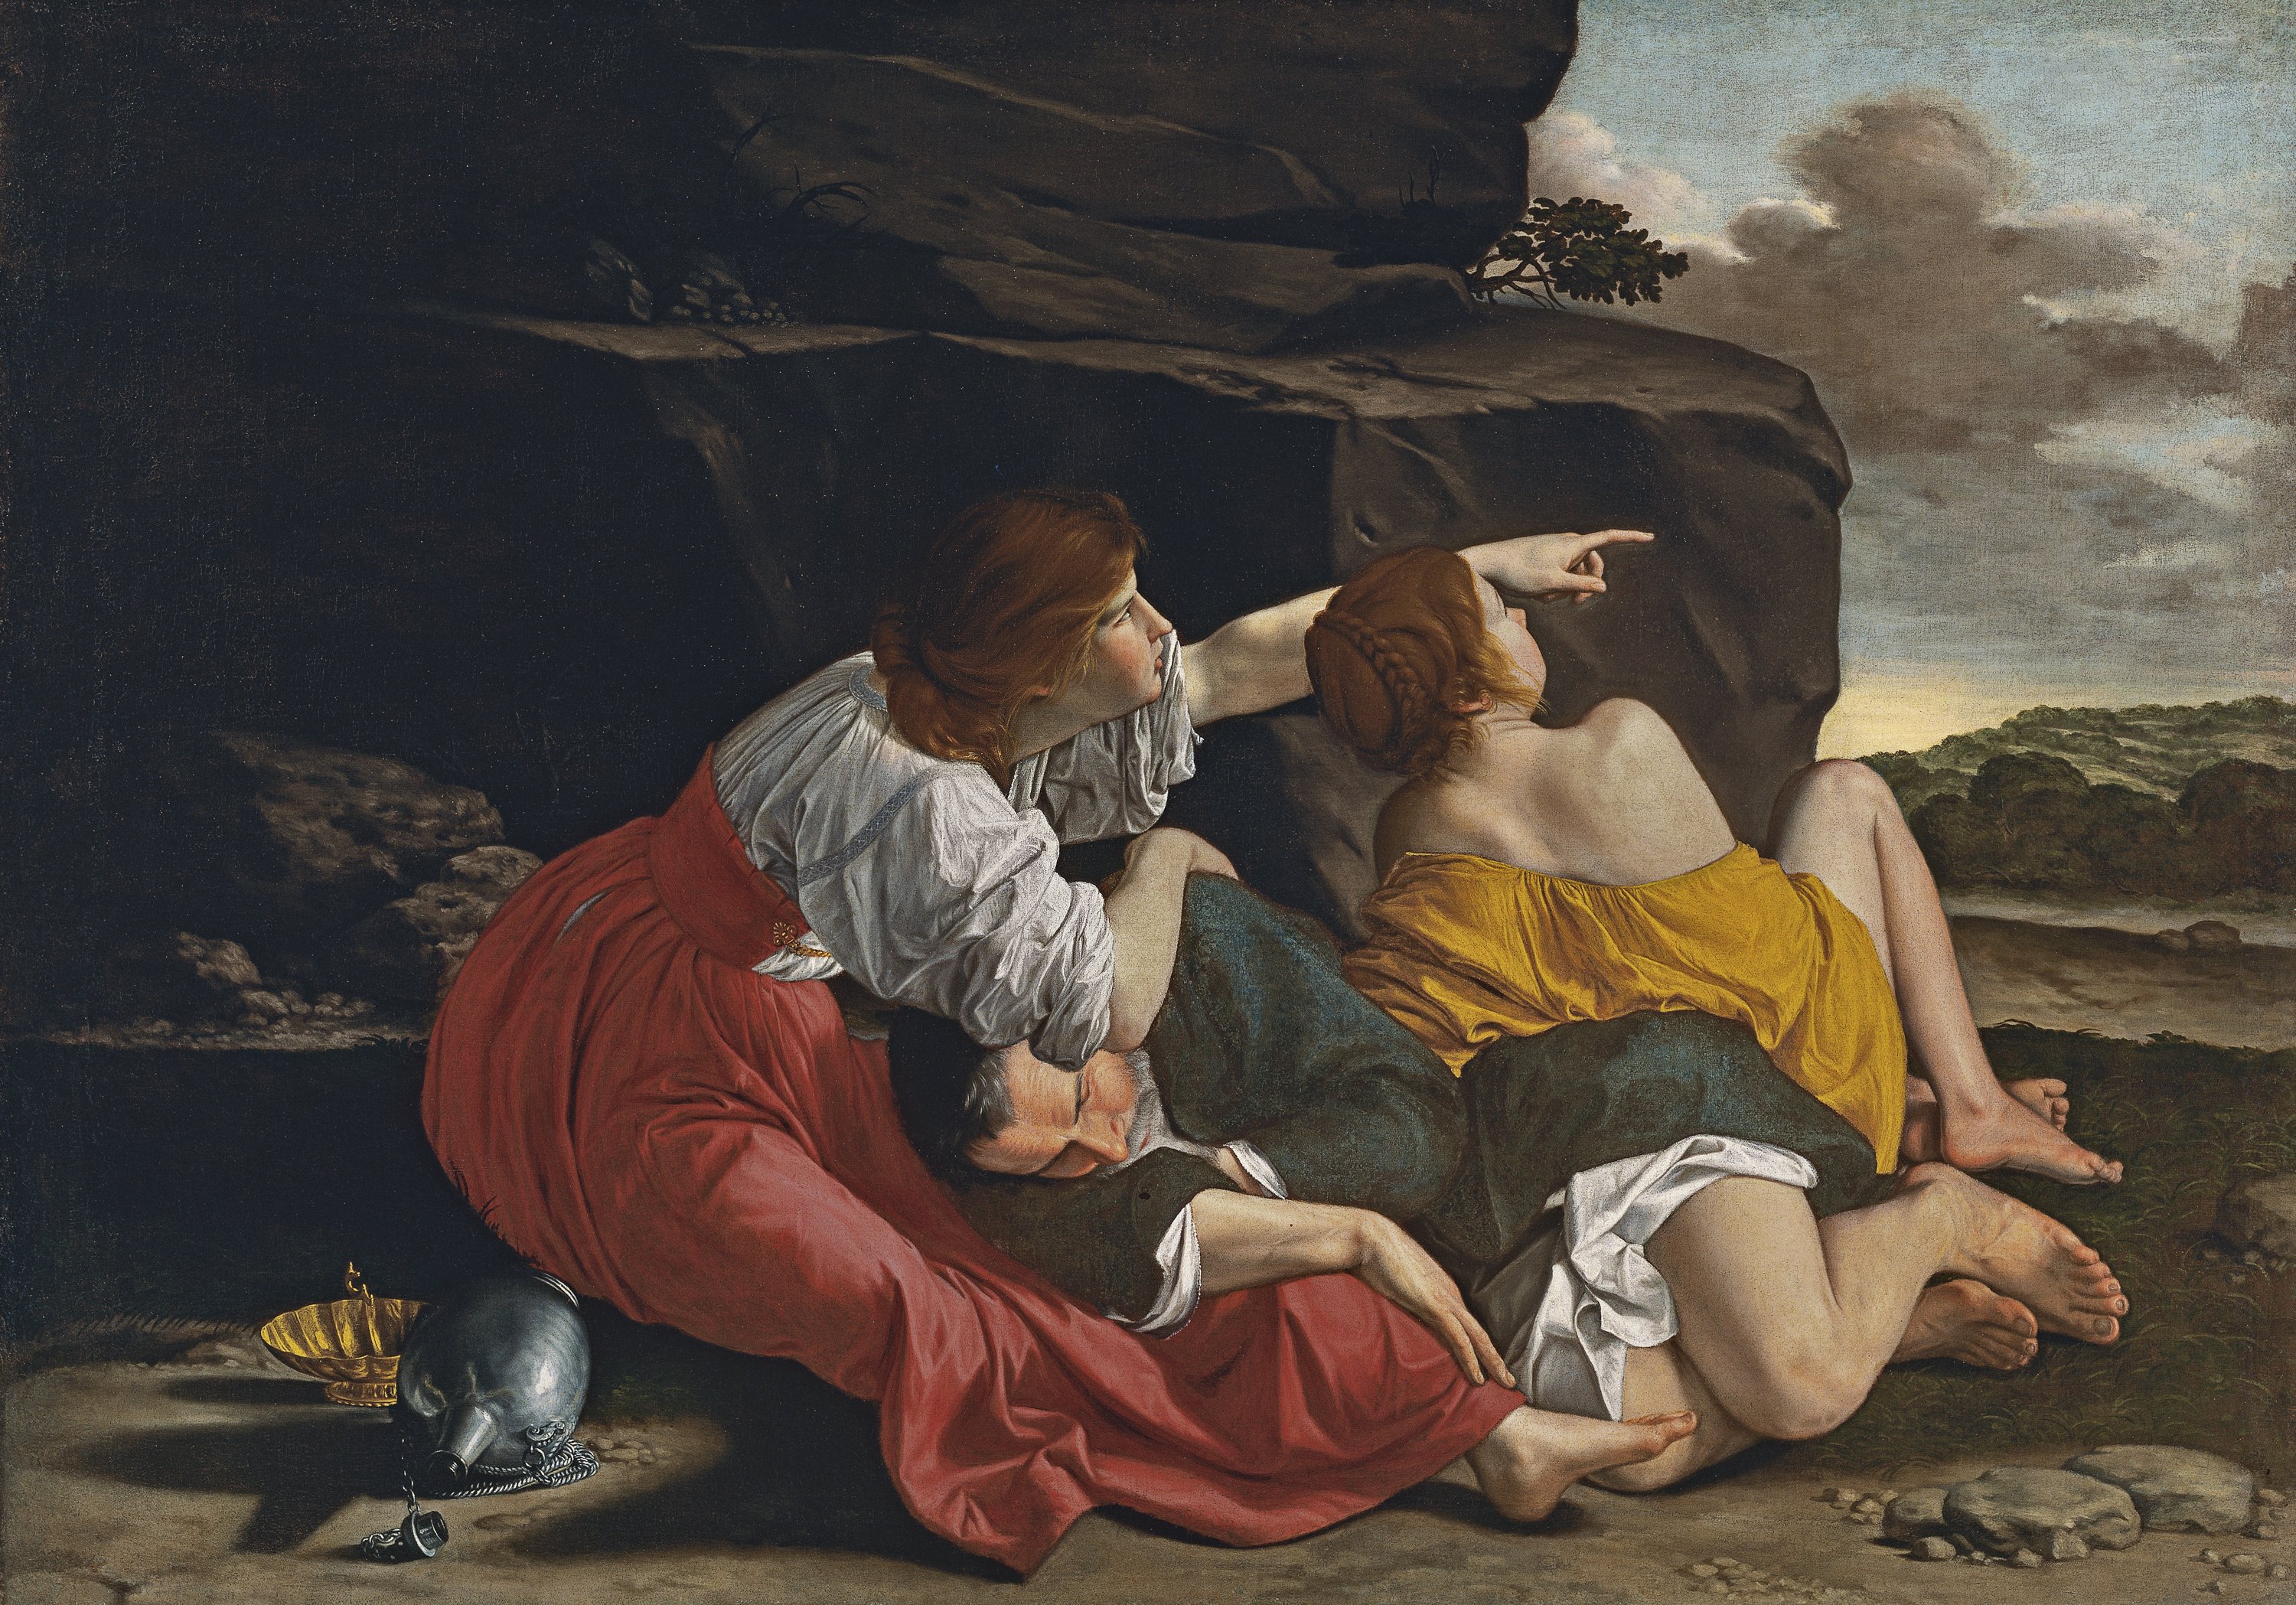 Lot and His Daughters. Lot y sus hijas, c. 1621-1623